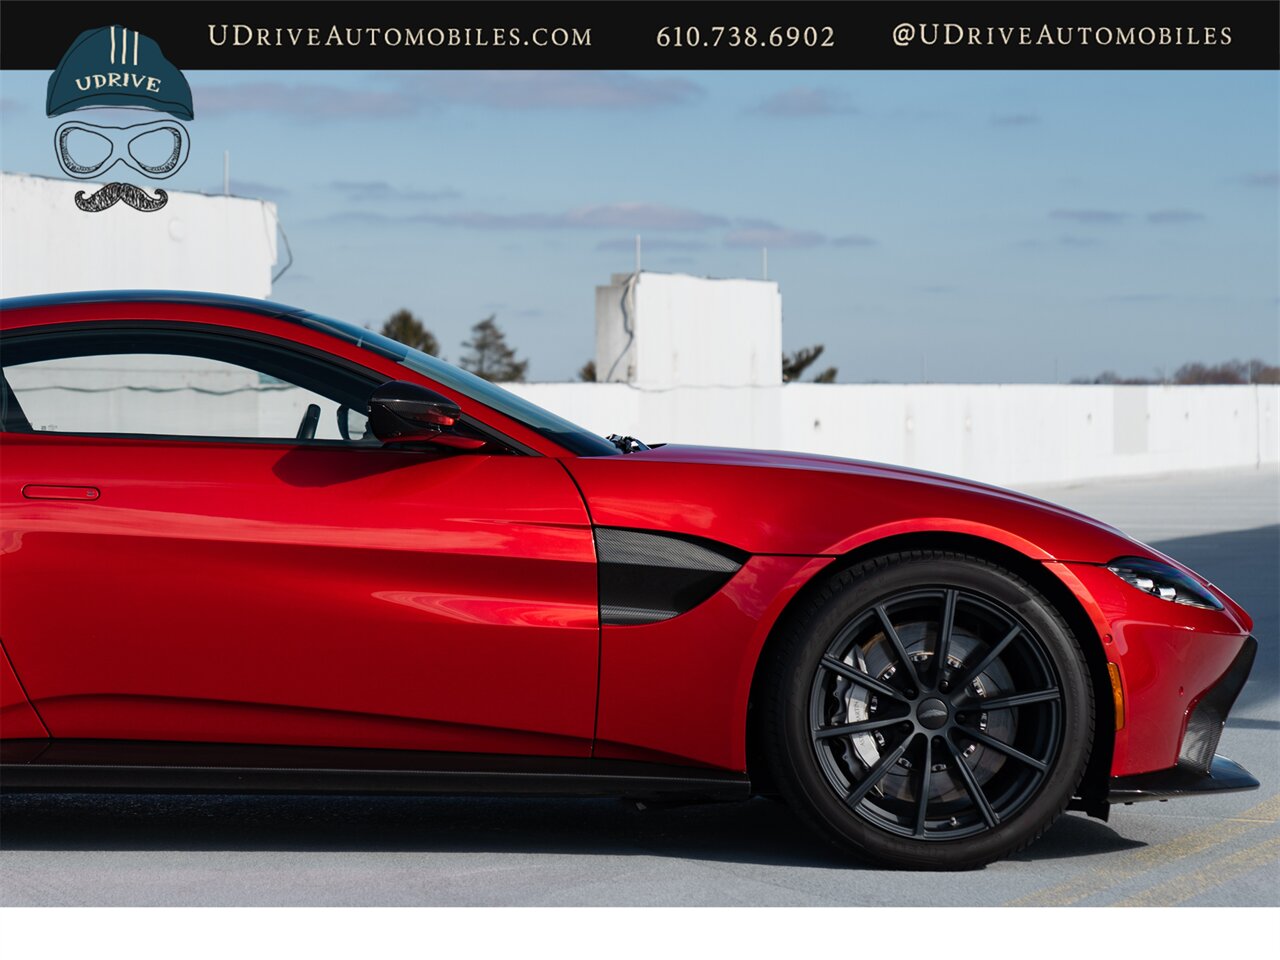 2019 Aston Martin Vantage  Incredibly Spec Rare Q Exclusive Fiamma Red $222k MSRP 1 of a Kind CPO - Photo 18 - West Chester, PA 19382